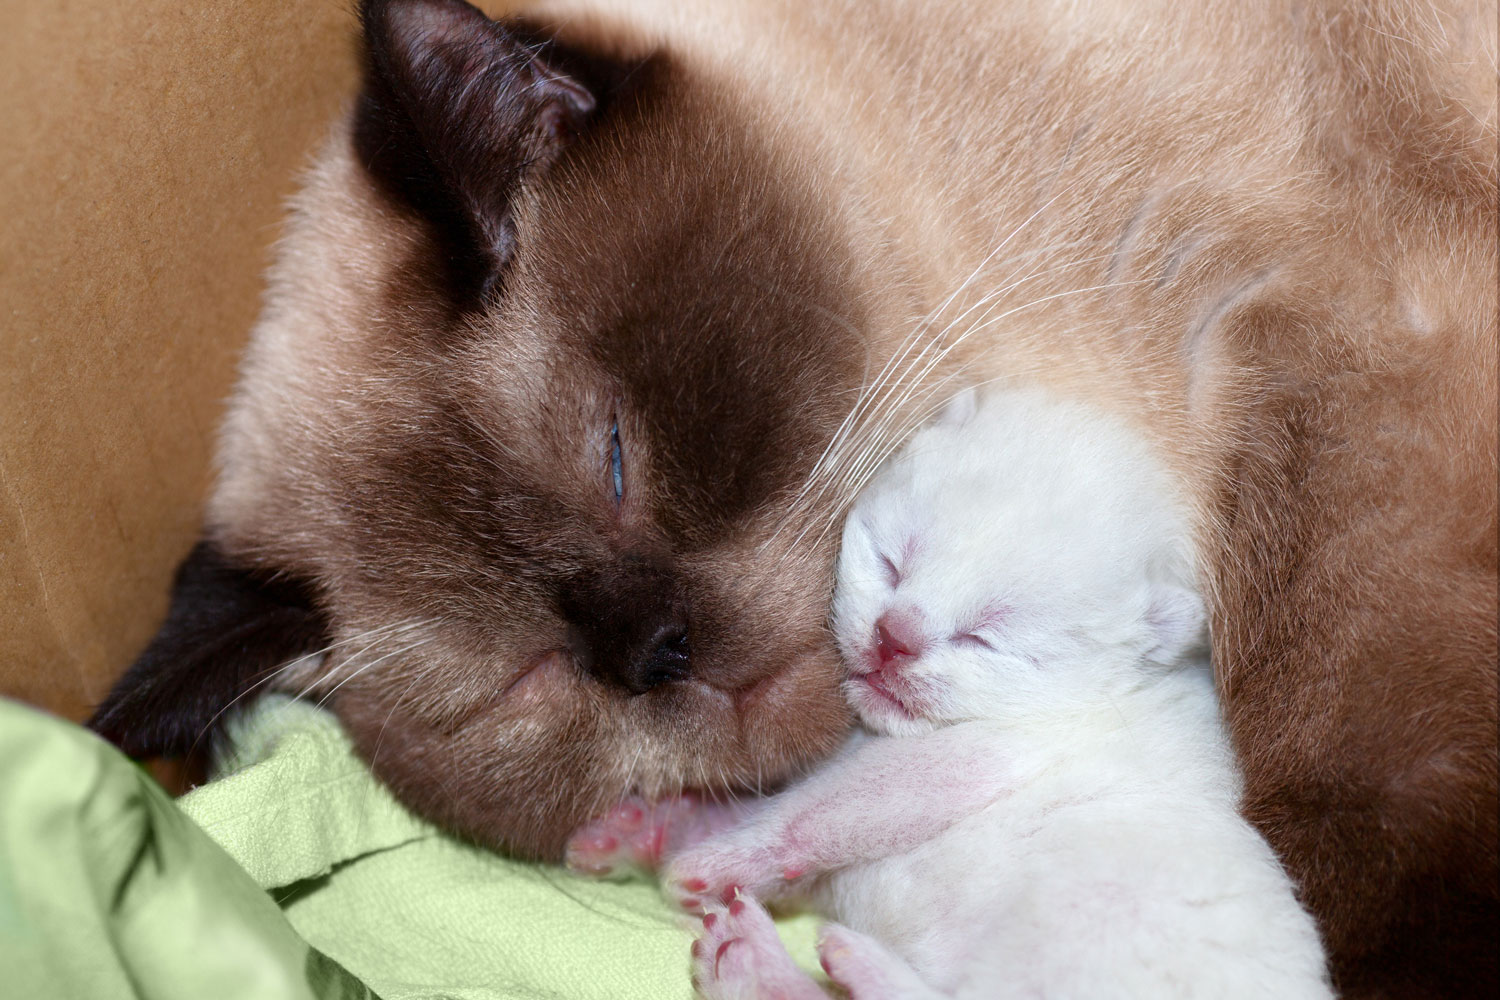 A newborn colorpoint kitten sleeping next to his mother